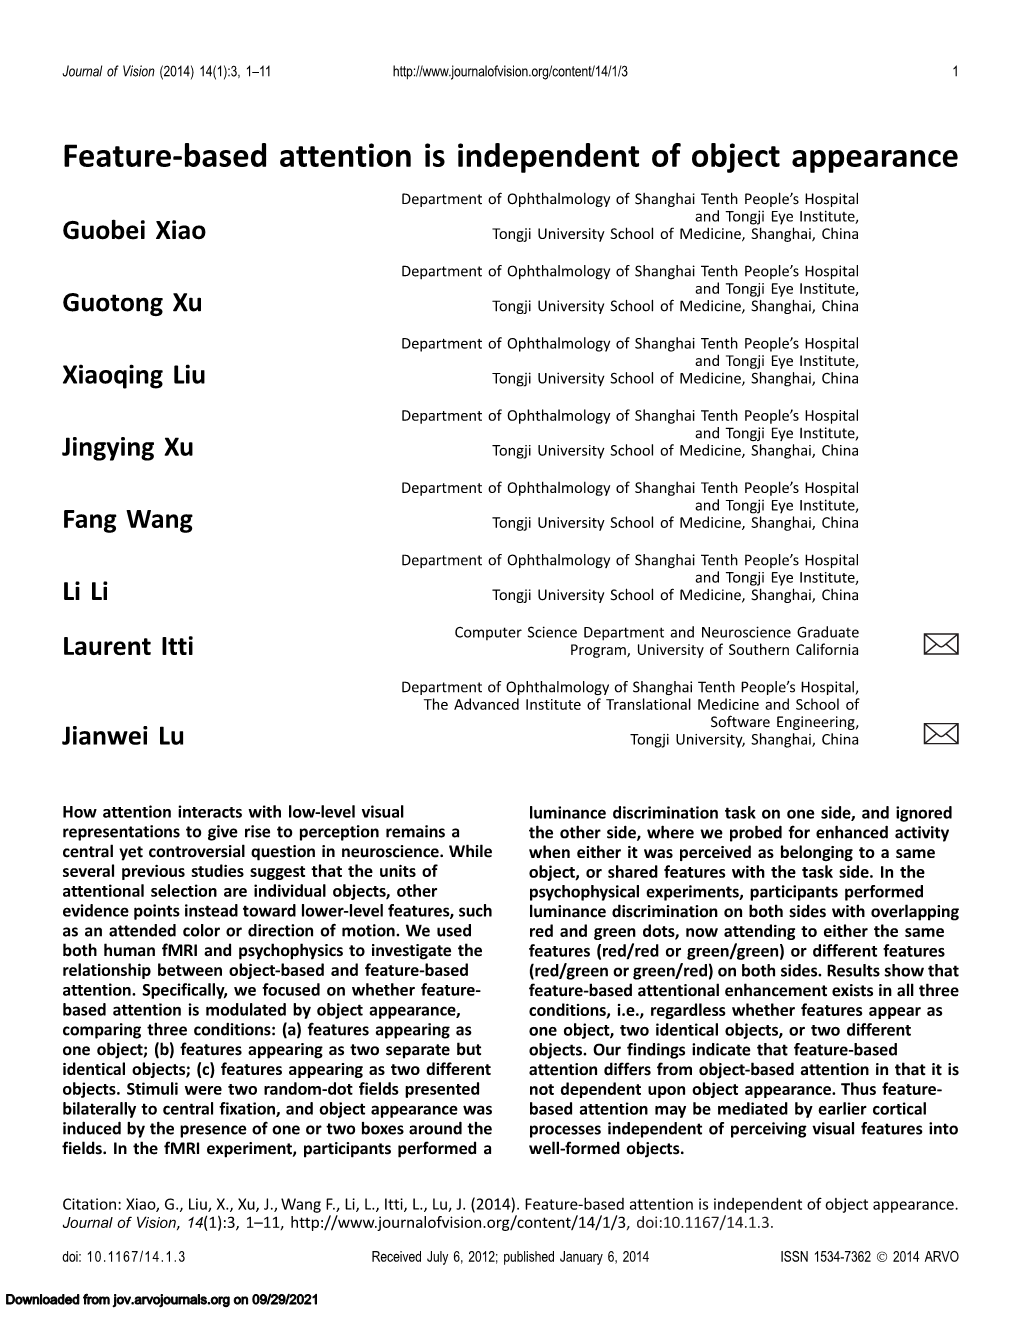 Feature-Based Attention Is Independent of Object Appearance